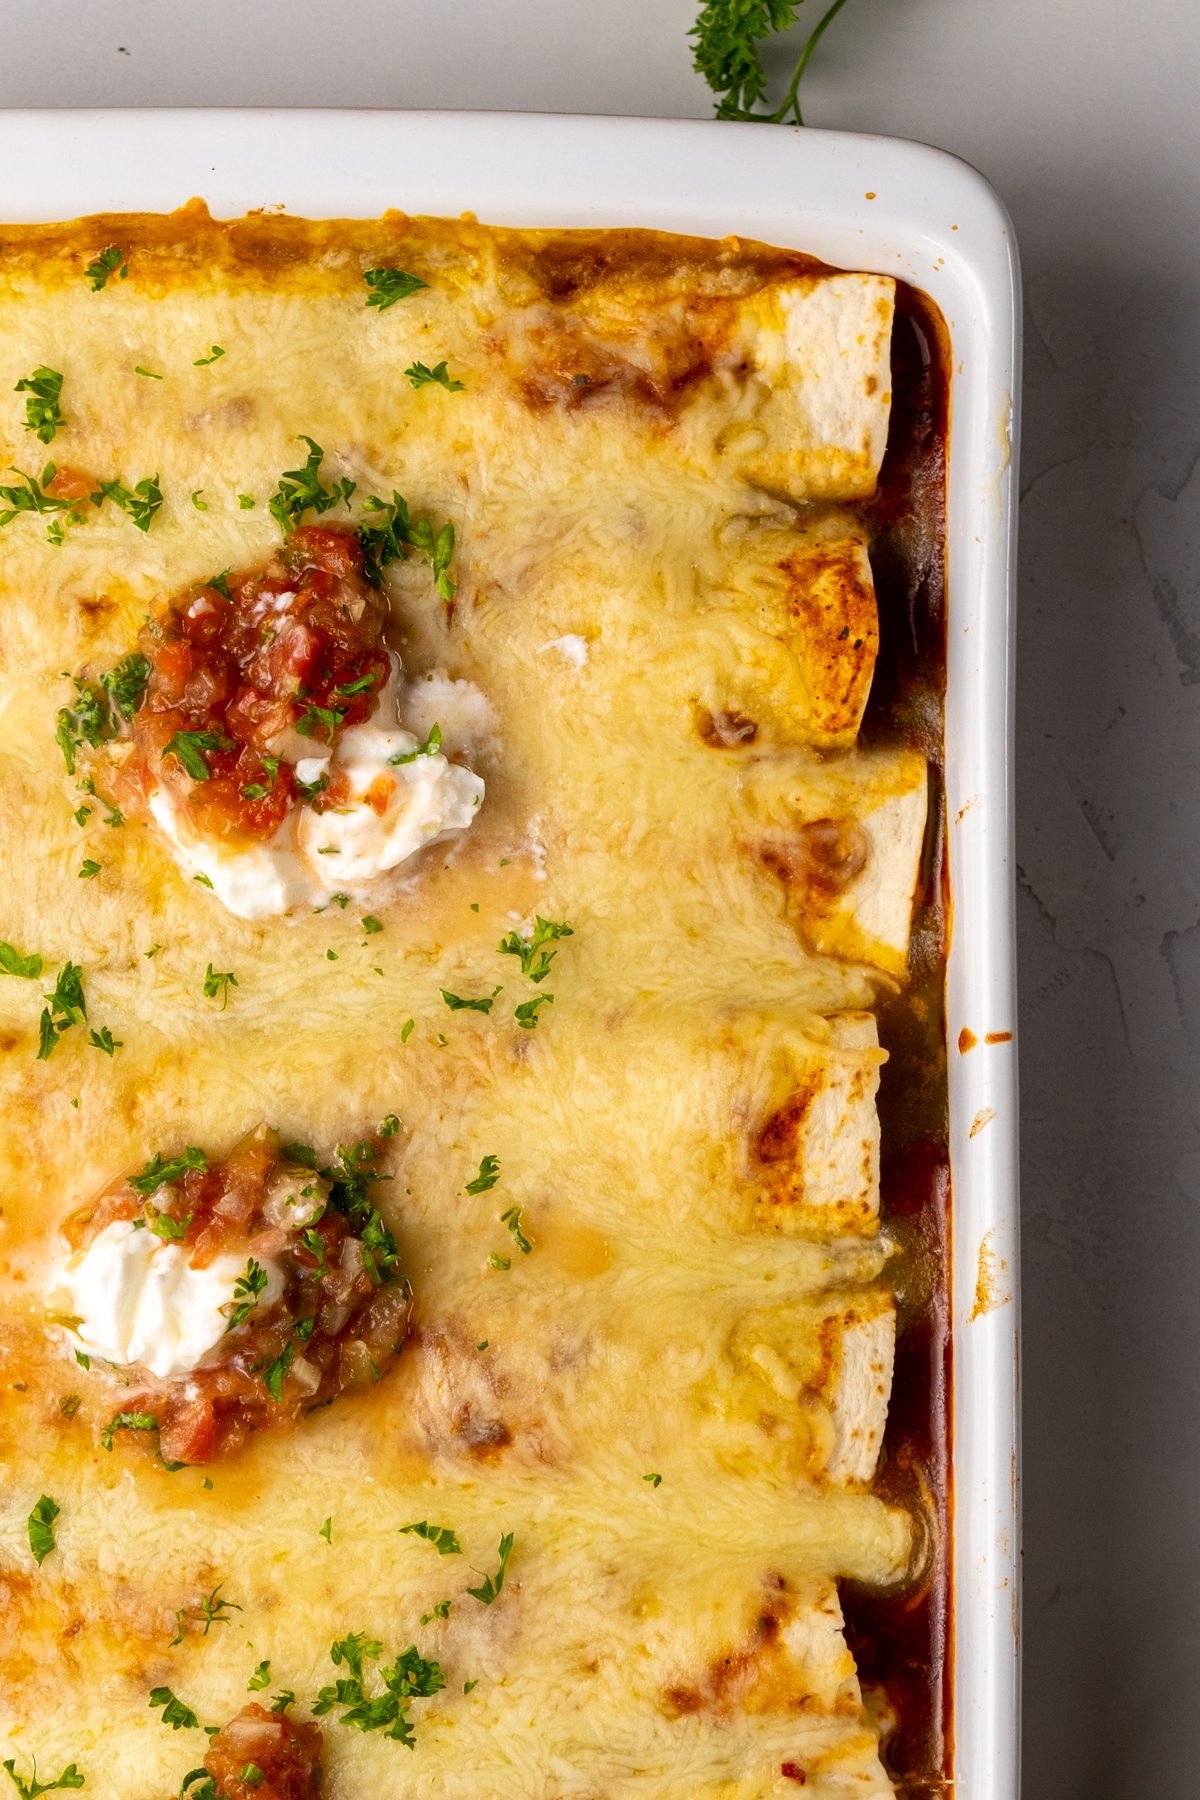 Chili Cheese Enchiladas topped with sour cream and salsa.